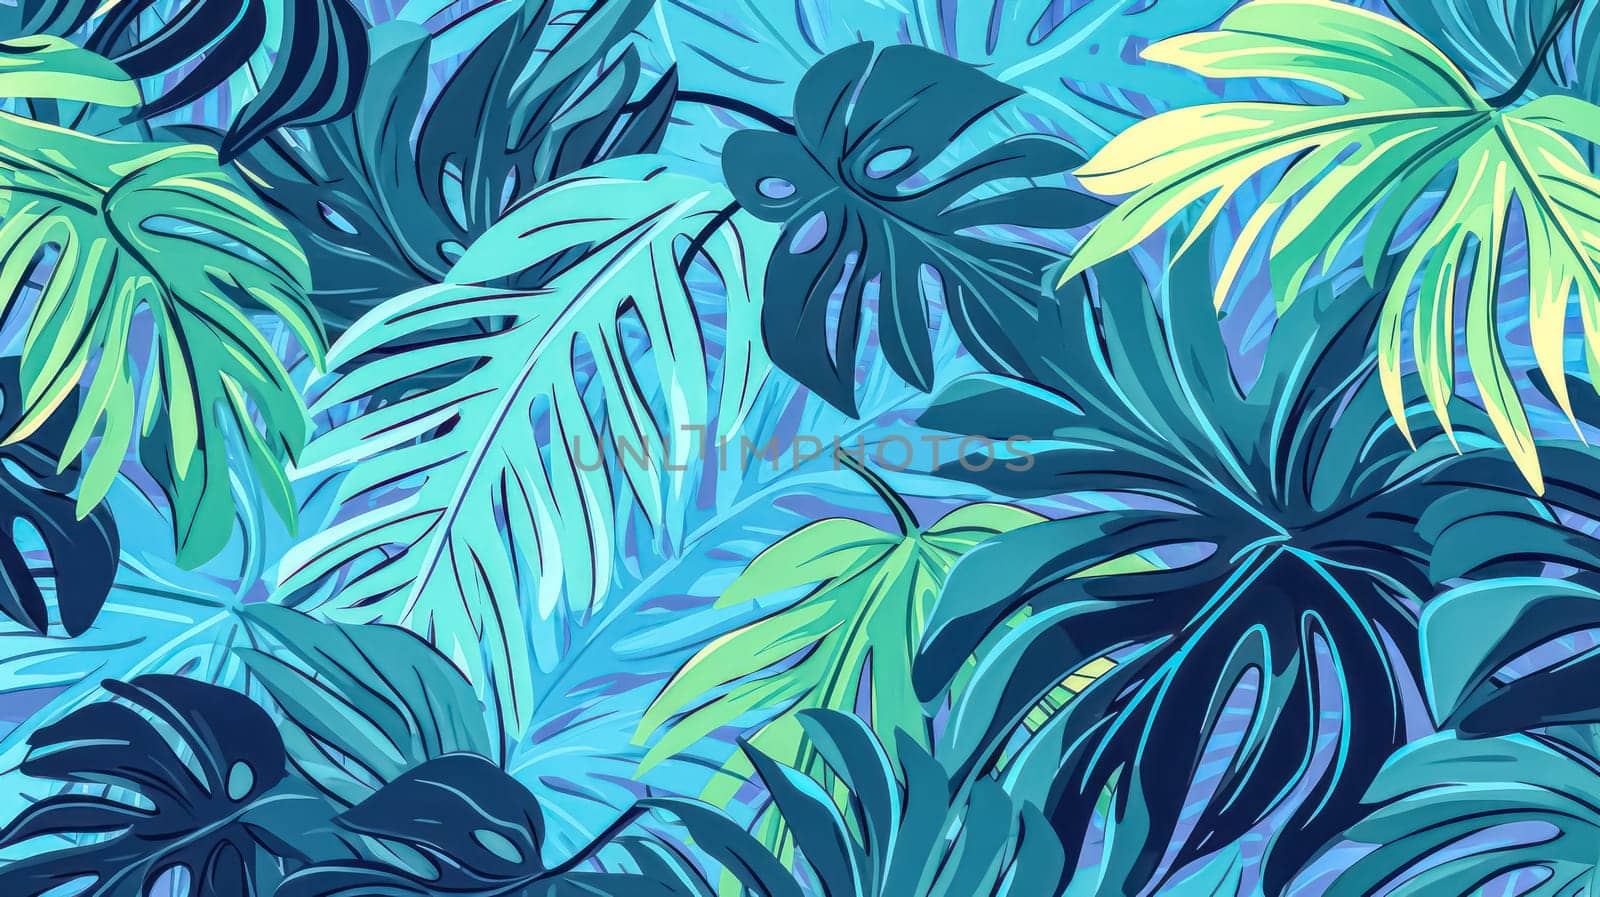 Transform your project with turquoise and green tropical leaves. This seamless graphic design features amazing palms, ideal for fashion, interior, wrapping, and packaging. Realistic palm leaves add a touch of exotic allure.